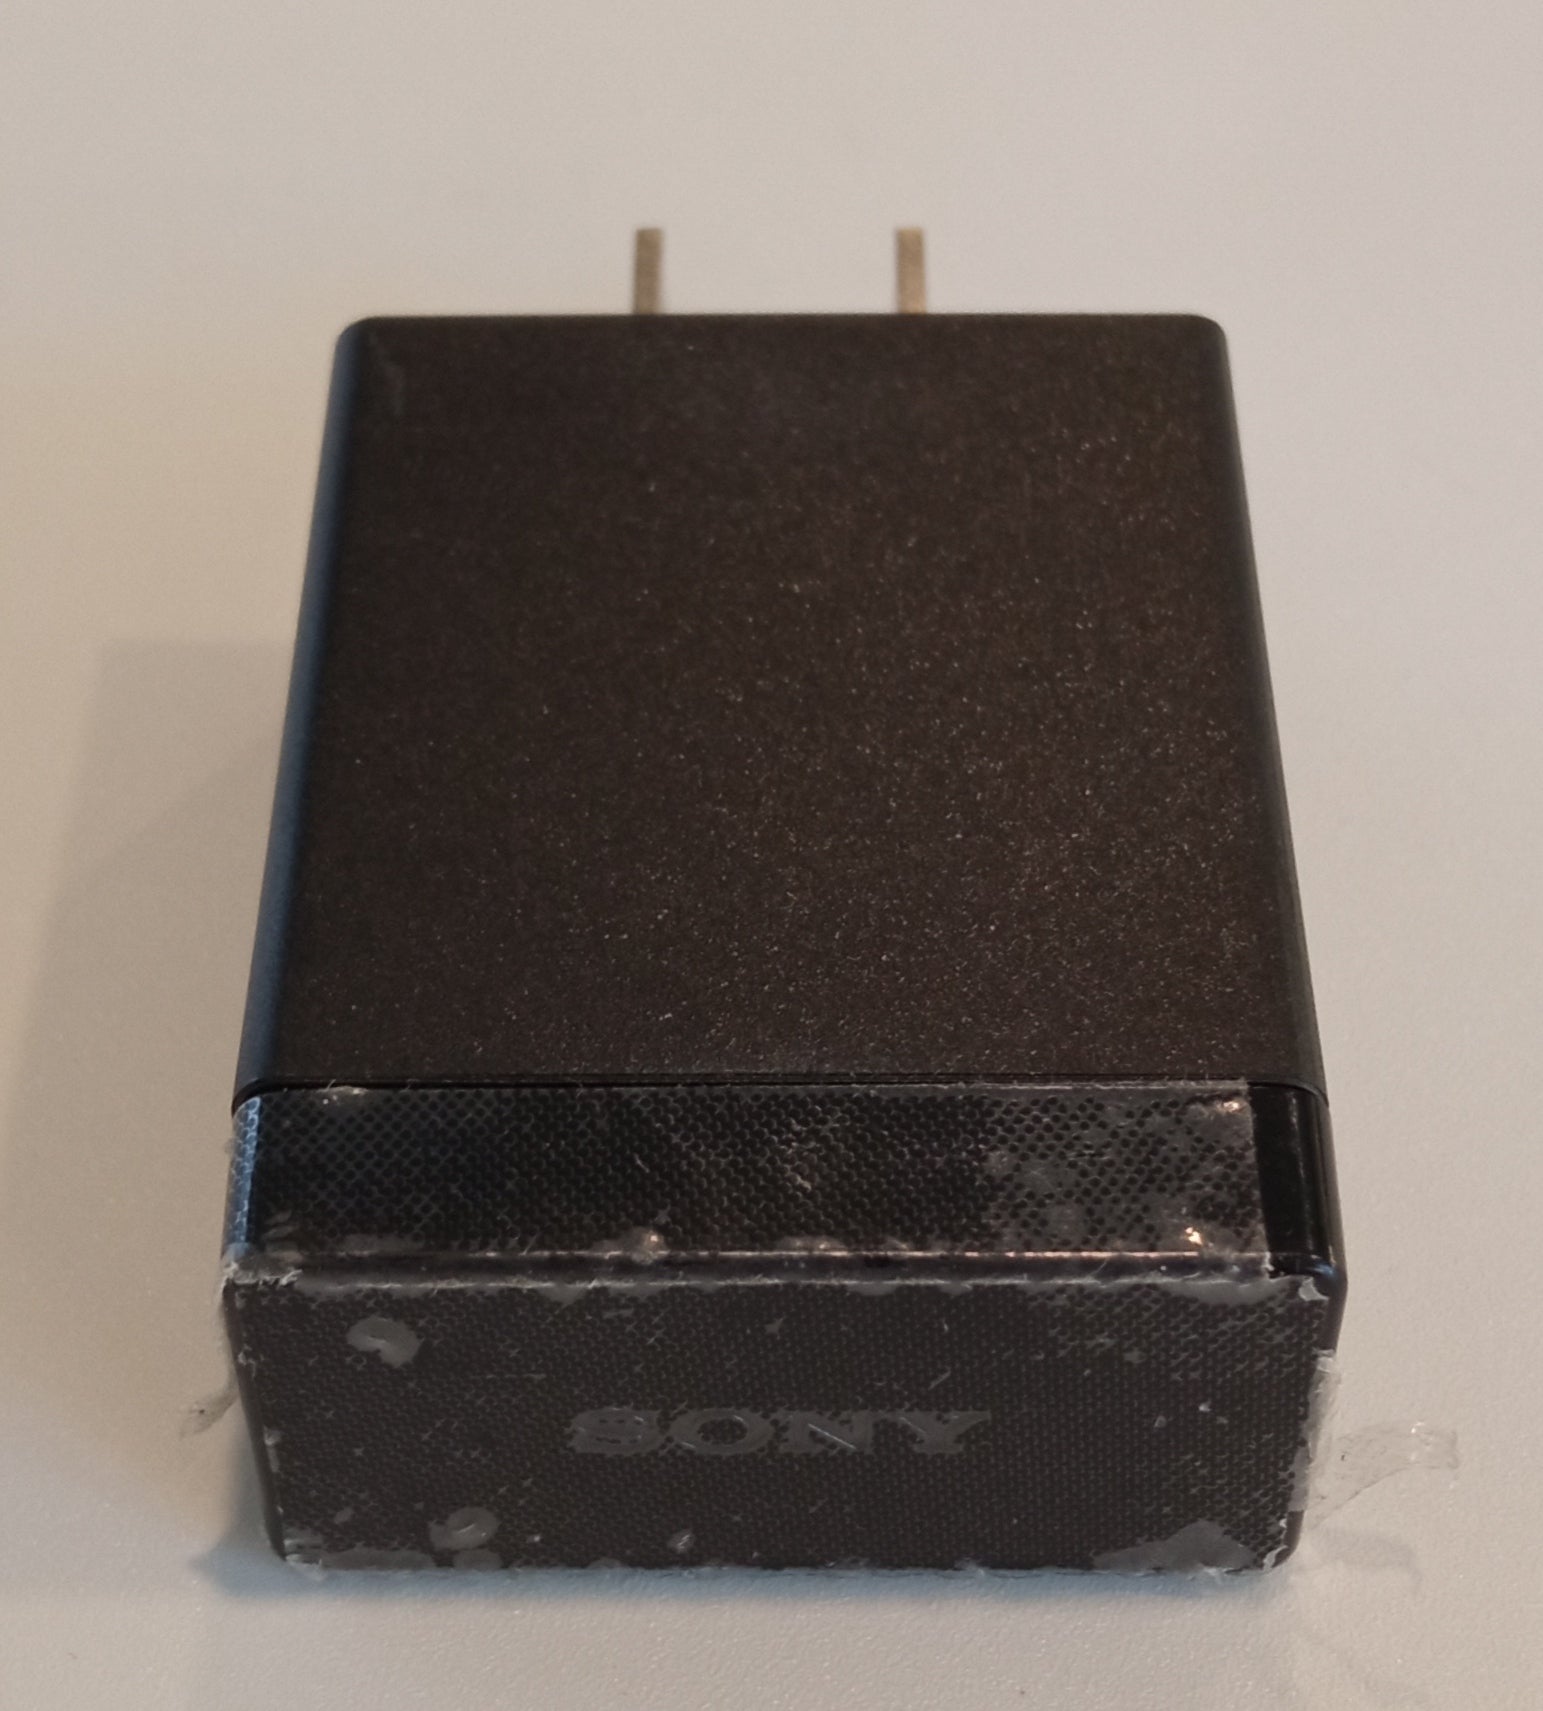 SONY USB Adapter - US Imported